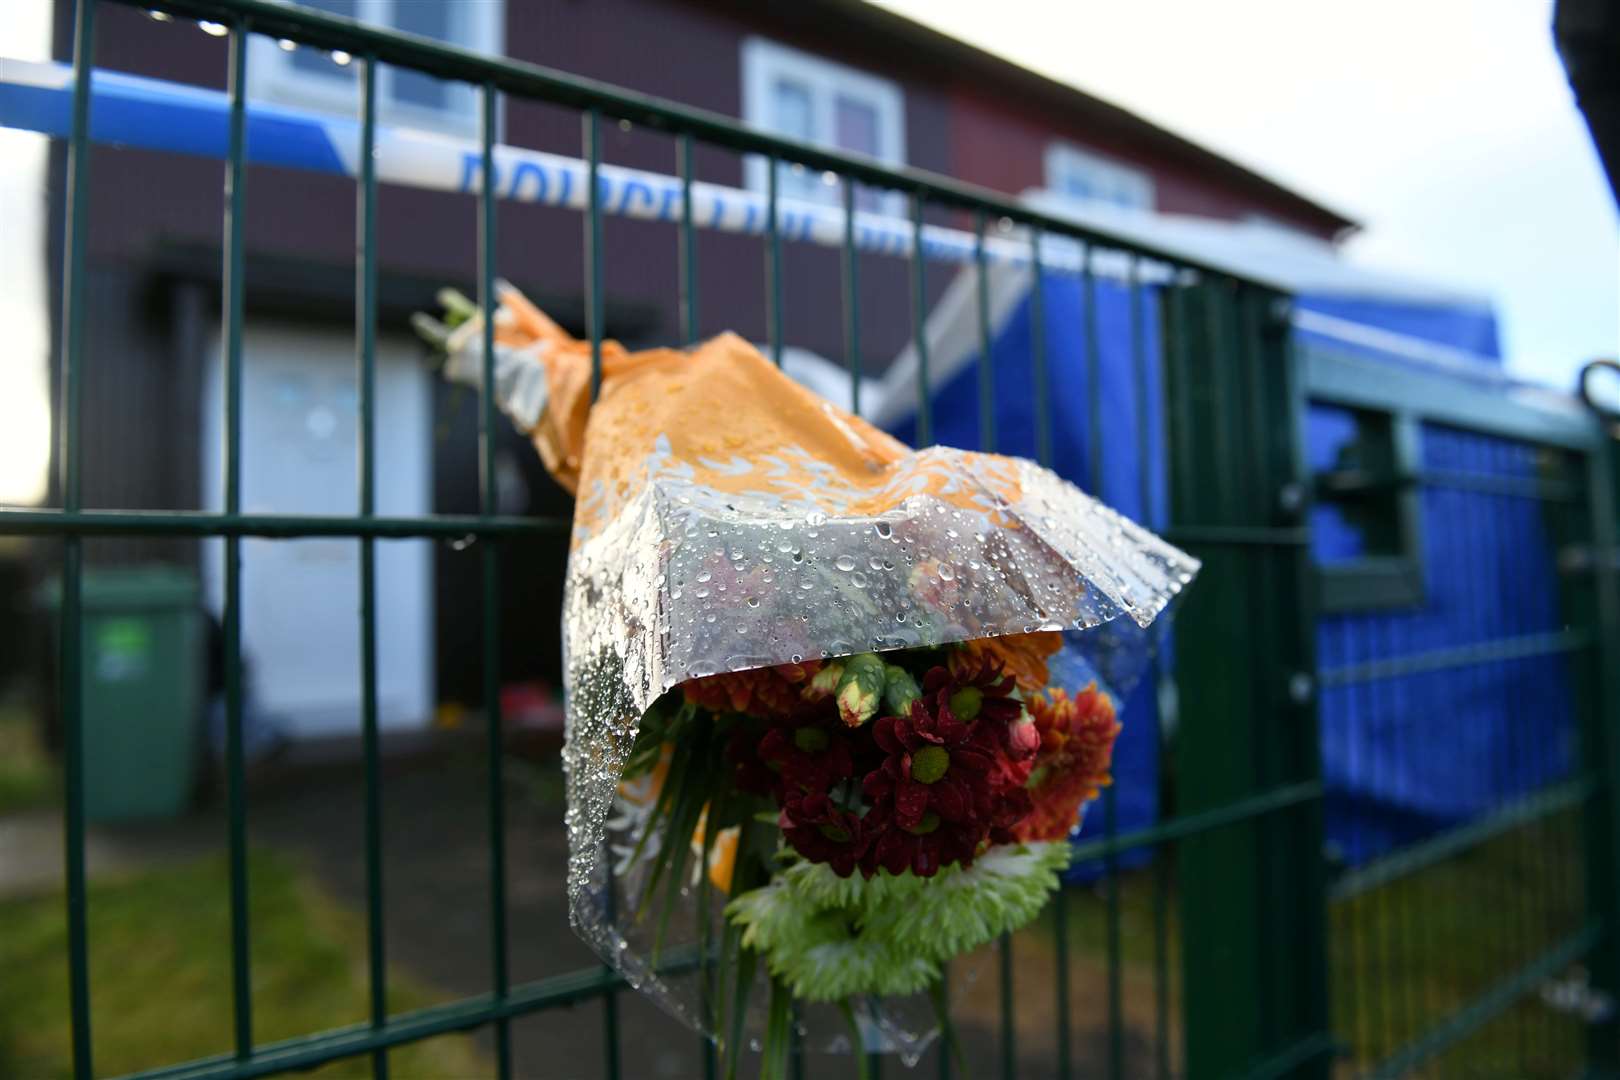 Tributes have been left following the murder of Ross MacGillivray.